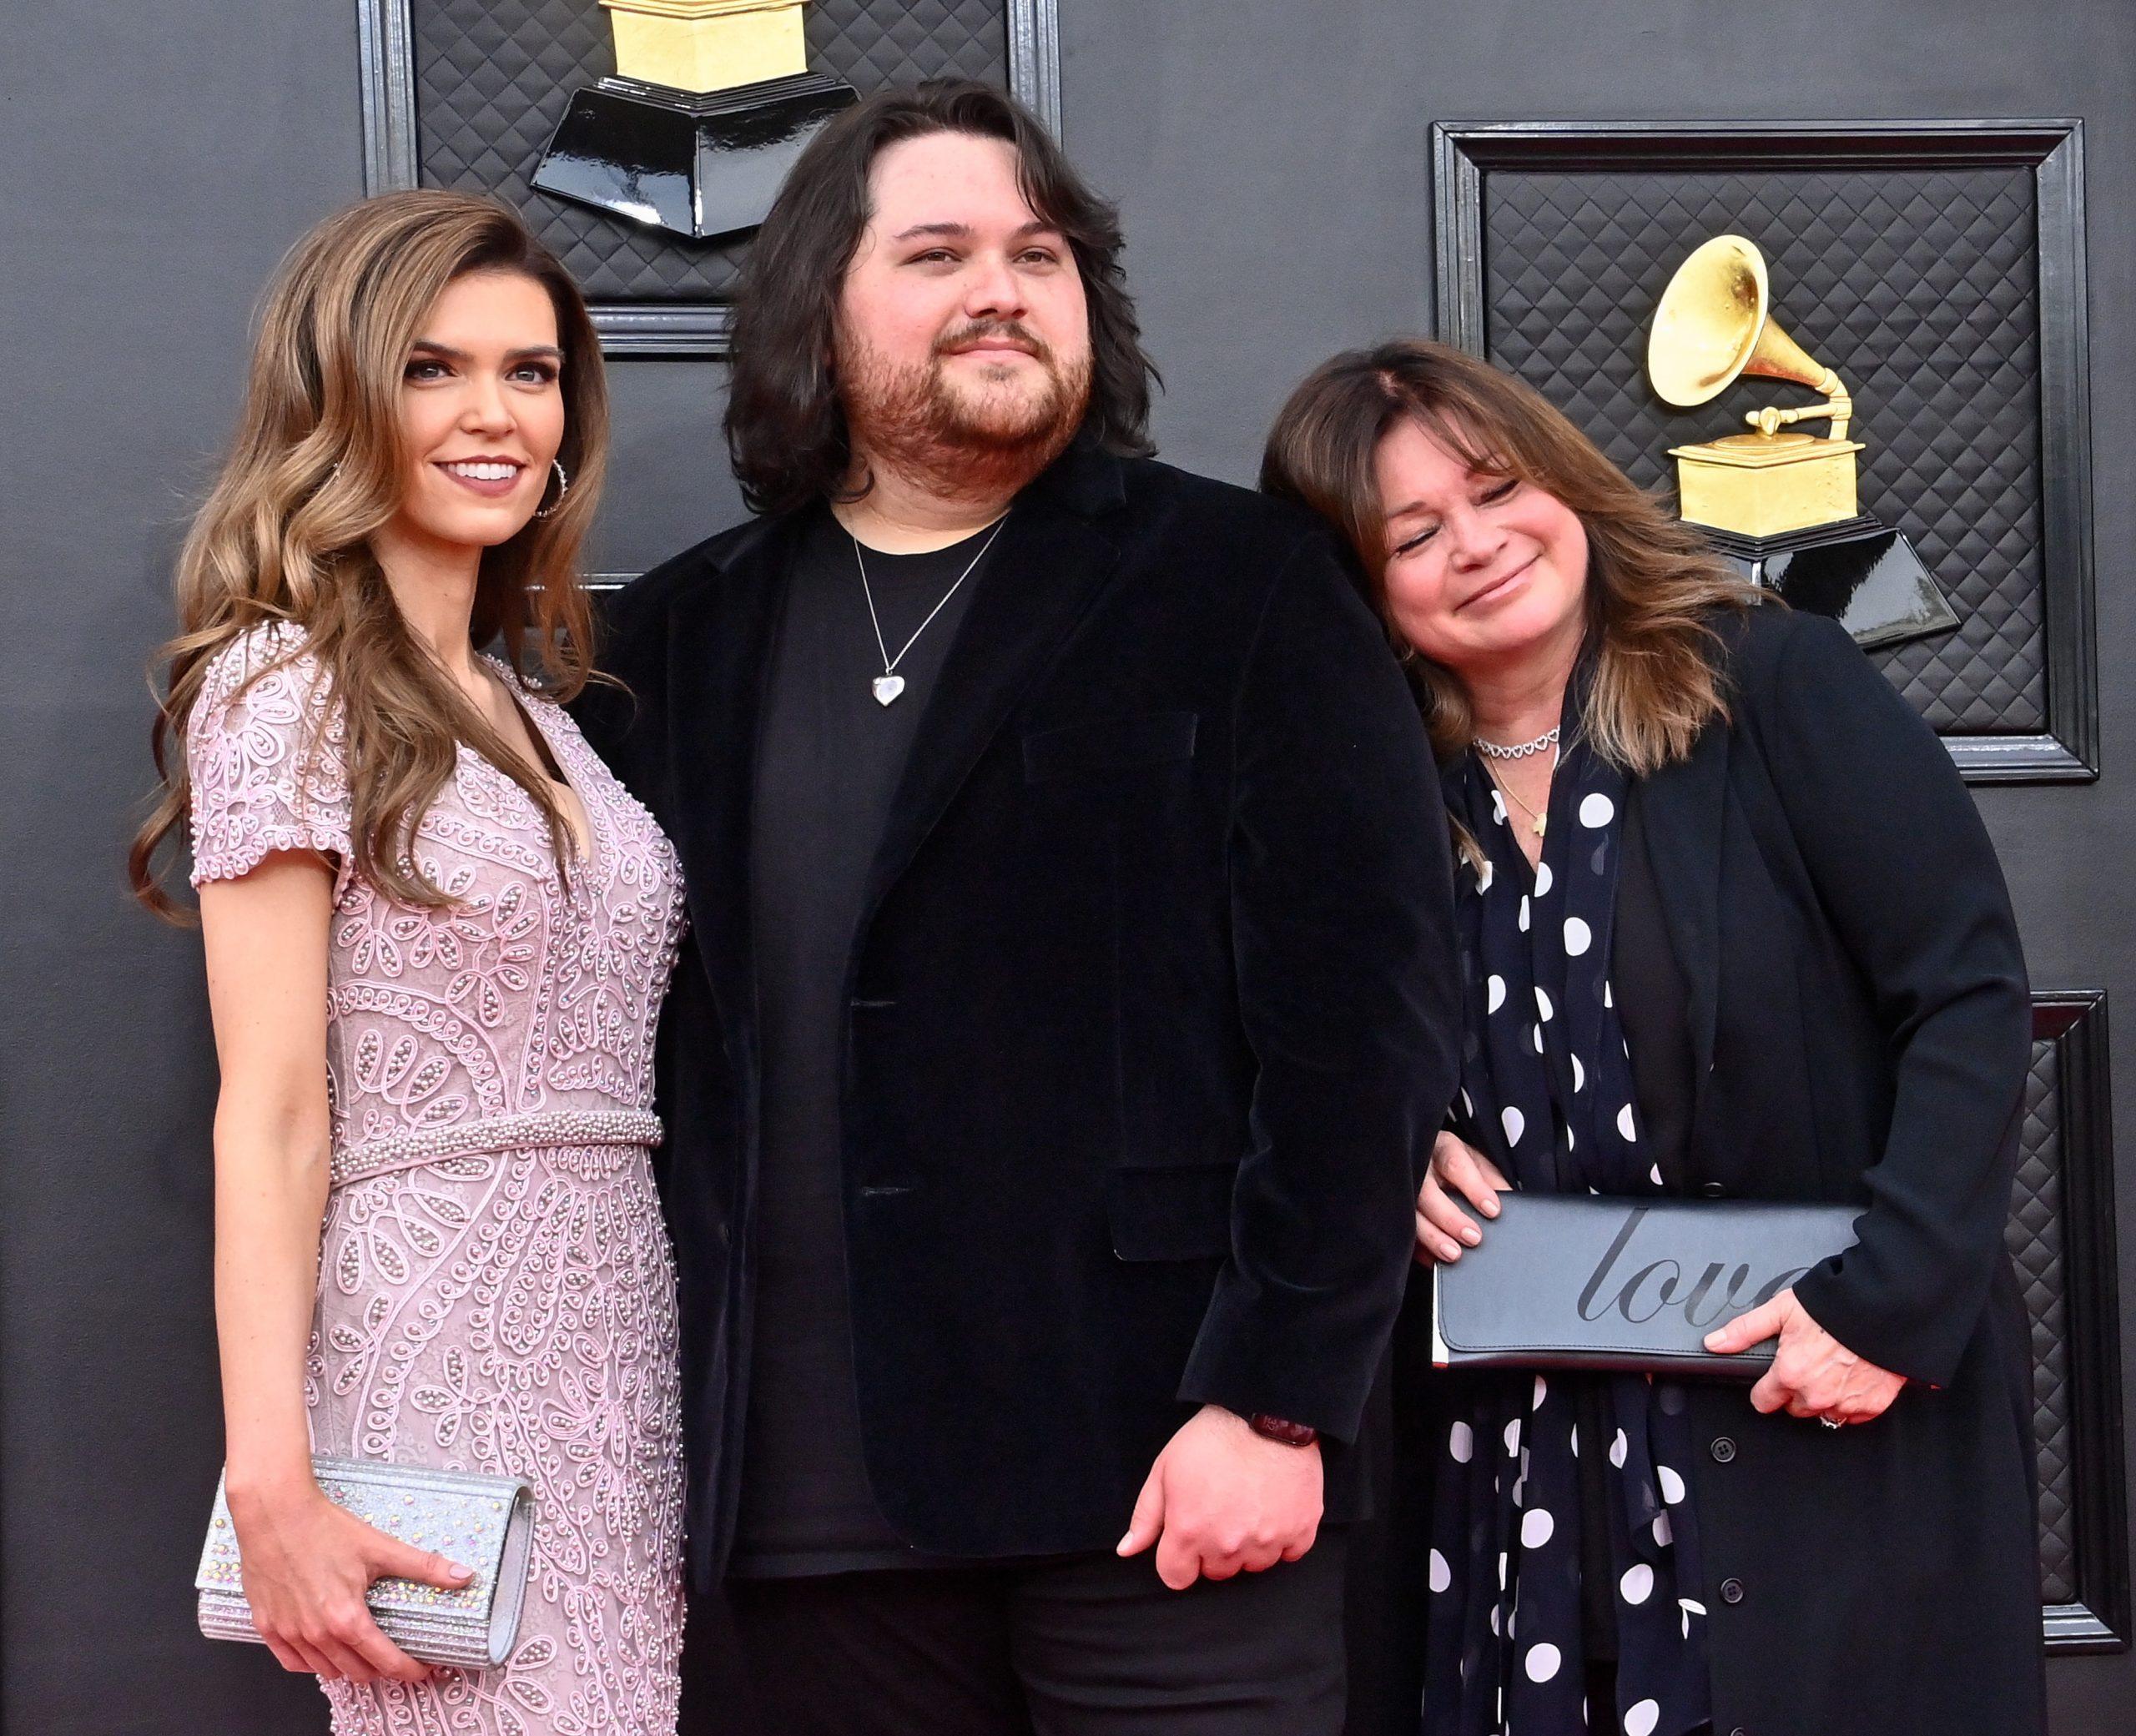 Andraia Allsop, Wolfgang Van Halen and Valerie Bertinelli Arrive for the 64th Grammy Awards in Las Vegas